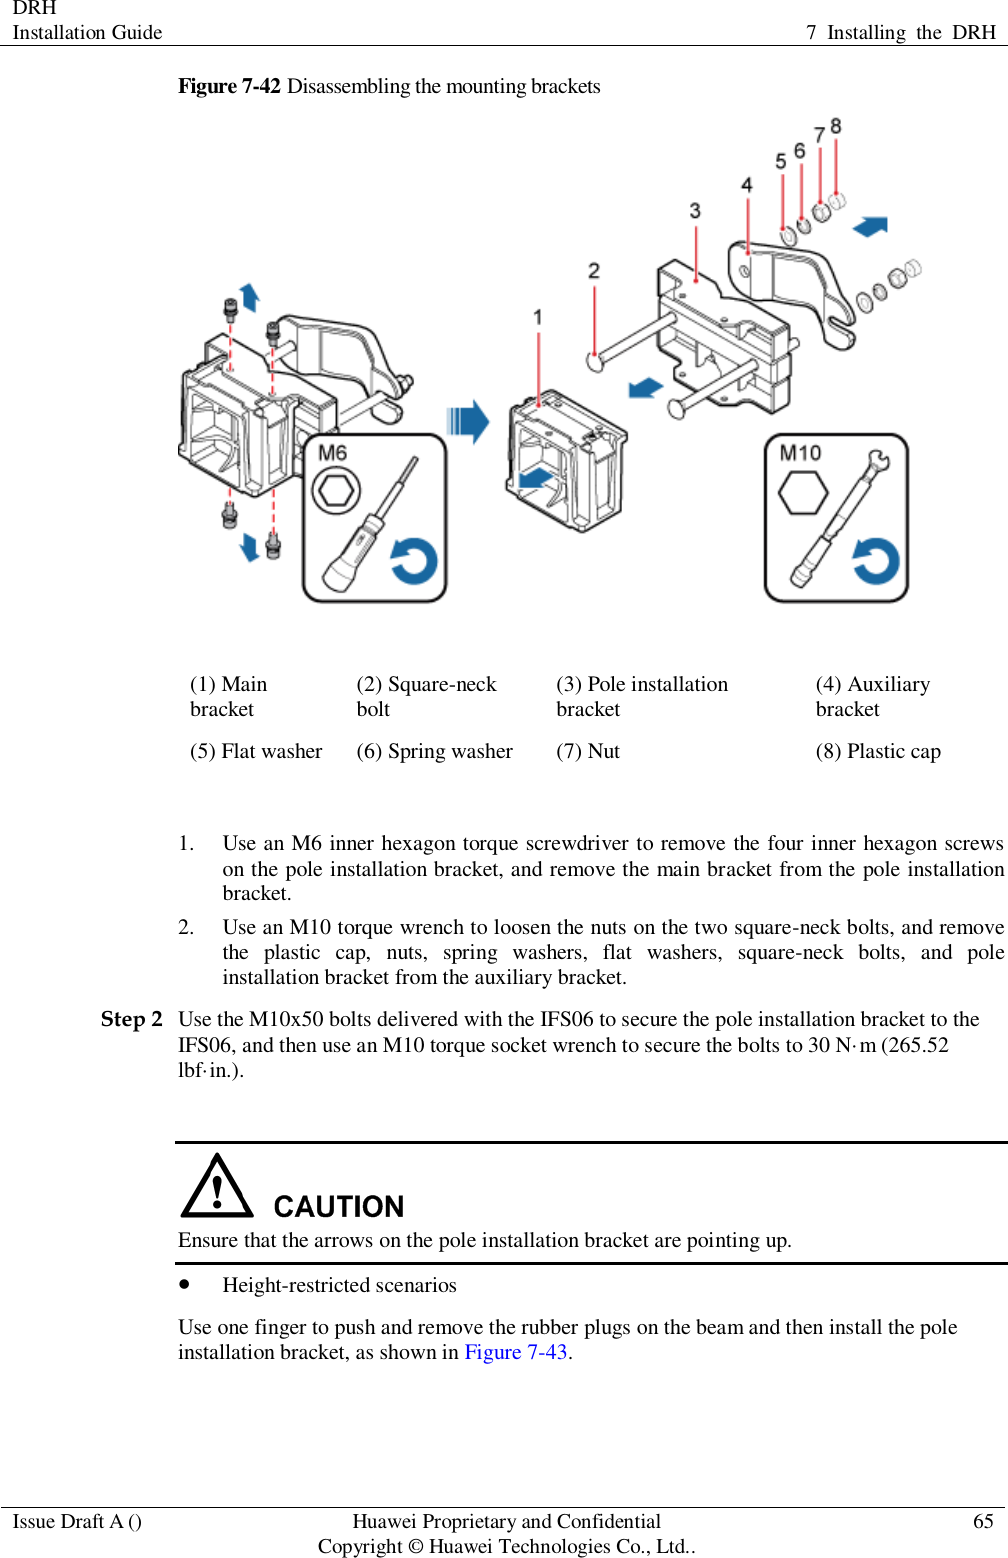 DRH   Installation Guide 7  Installing  the  DRH  Issue Draft A () Huawei Proprietary and Confidential                                     Copyright © Huawei Technologies Co., Ltd.. 65  Figure 7-42 Disassembling the mounting brackets  (1) Main bracket (2) Square-neck bolt (3) Pole installation bracket (4) Auxiliary bracket (5) Flat washer (6) Spring washer (7) Nut (8) Plastic cap  1. Use an M6 inner hexagon torque screwdriver to remove the four inner hexagon screws on the pole installation bracket, and remove the main bracket from the pole installation bracket. 2. Use an M10 torque wrench to loosen the nuts on the two square-neck bolts, and remove the  plastic  cap,  nuts,  spring  washers,  flat  washers,  square-neck  bolts,  and  pole installation bracket from the auxiliary bracket. Step 2 Use the M10x50 bolts delivered with the IFS06 to secure the pole installation bracket to the IFS06, and then use an M10 torque socket wrench to secure the bolts to 30 N·m (265.52 lbf·in.).   Ensure that the arrows on the pole installation bracket are pointing up.  Height-restricted scenarios Use one finger to push and remove the rubber plugs on the beam and then install the pole installation bracket, as shown in Figure 7-43. 